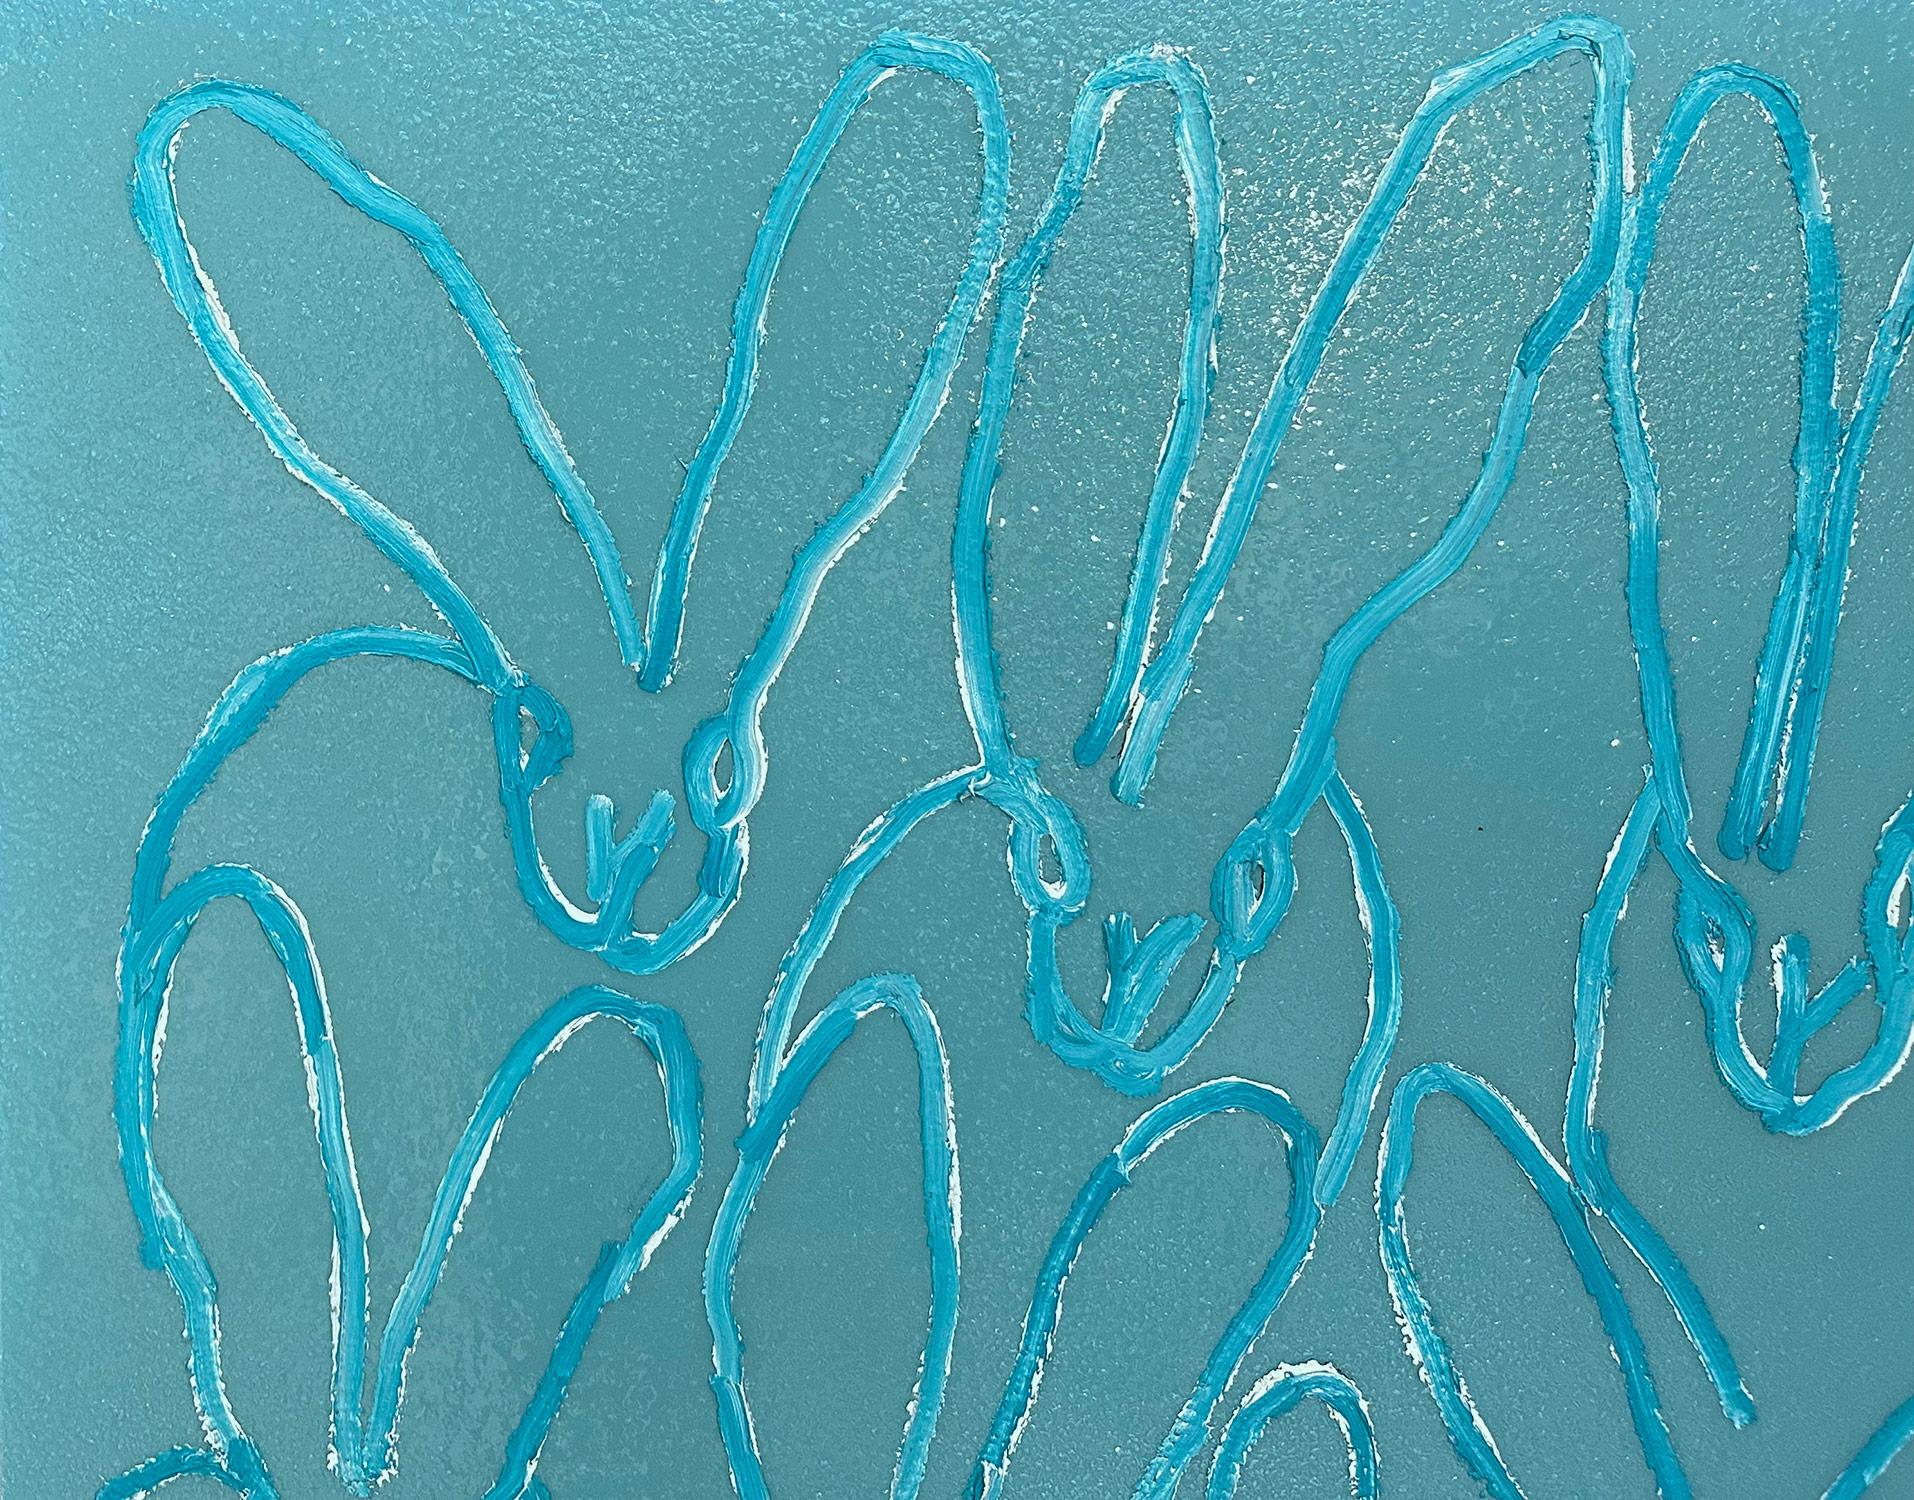 A wonderful composition of one of Slonem's most iconic subjects, Bunnies. This piece depicts gestural figures of white bunnies on a Turquoise blue-green background with thick use of paint and diamond dust. Inspired by nature and a genuine love for